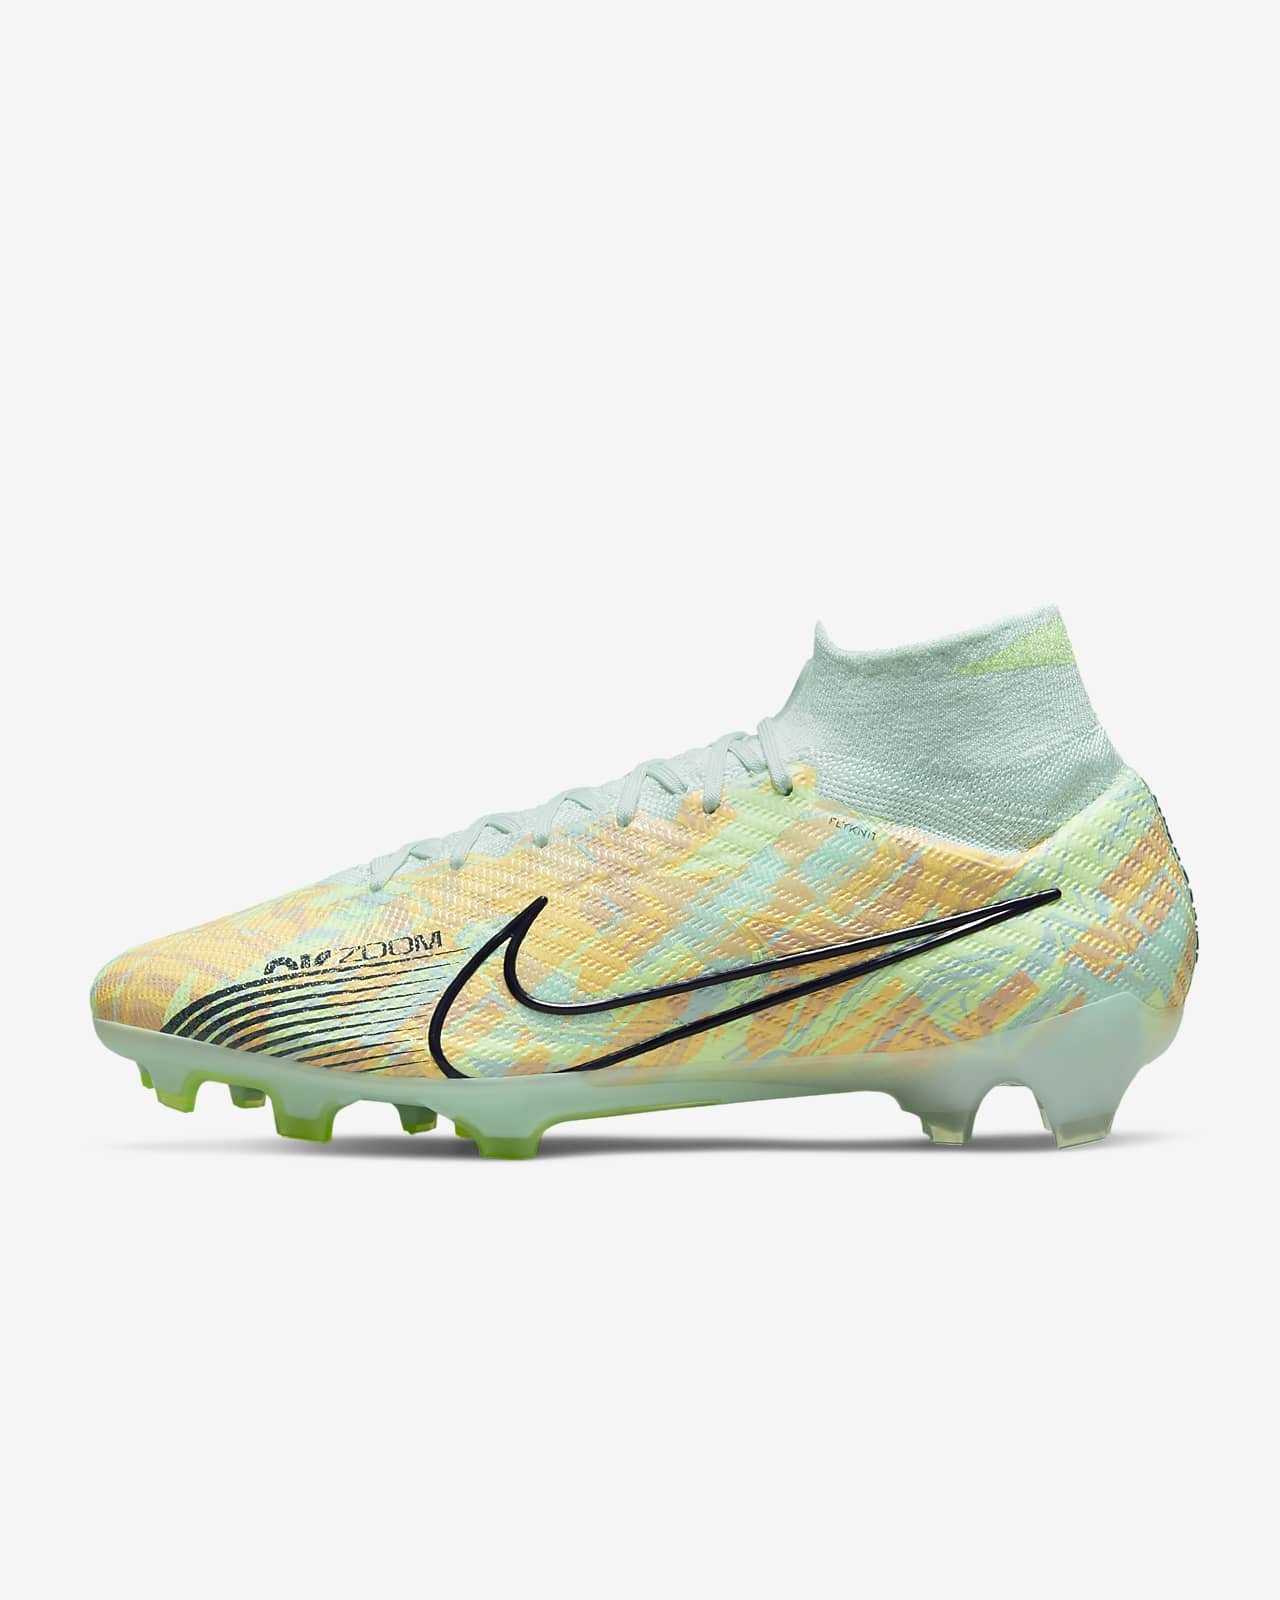 Nike Mercurial Superfly 9 Elite Firm-Ground High-Top Football Boot